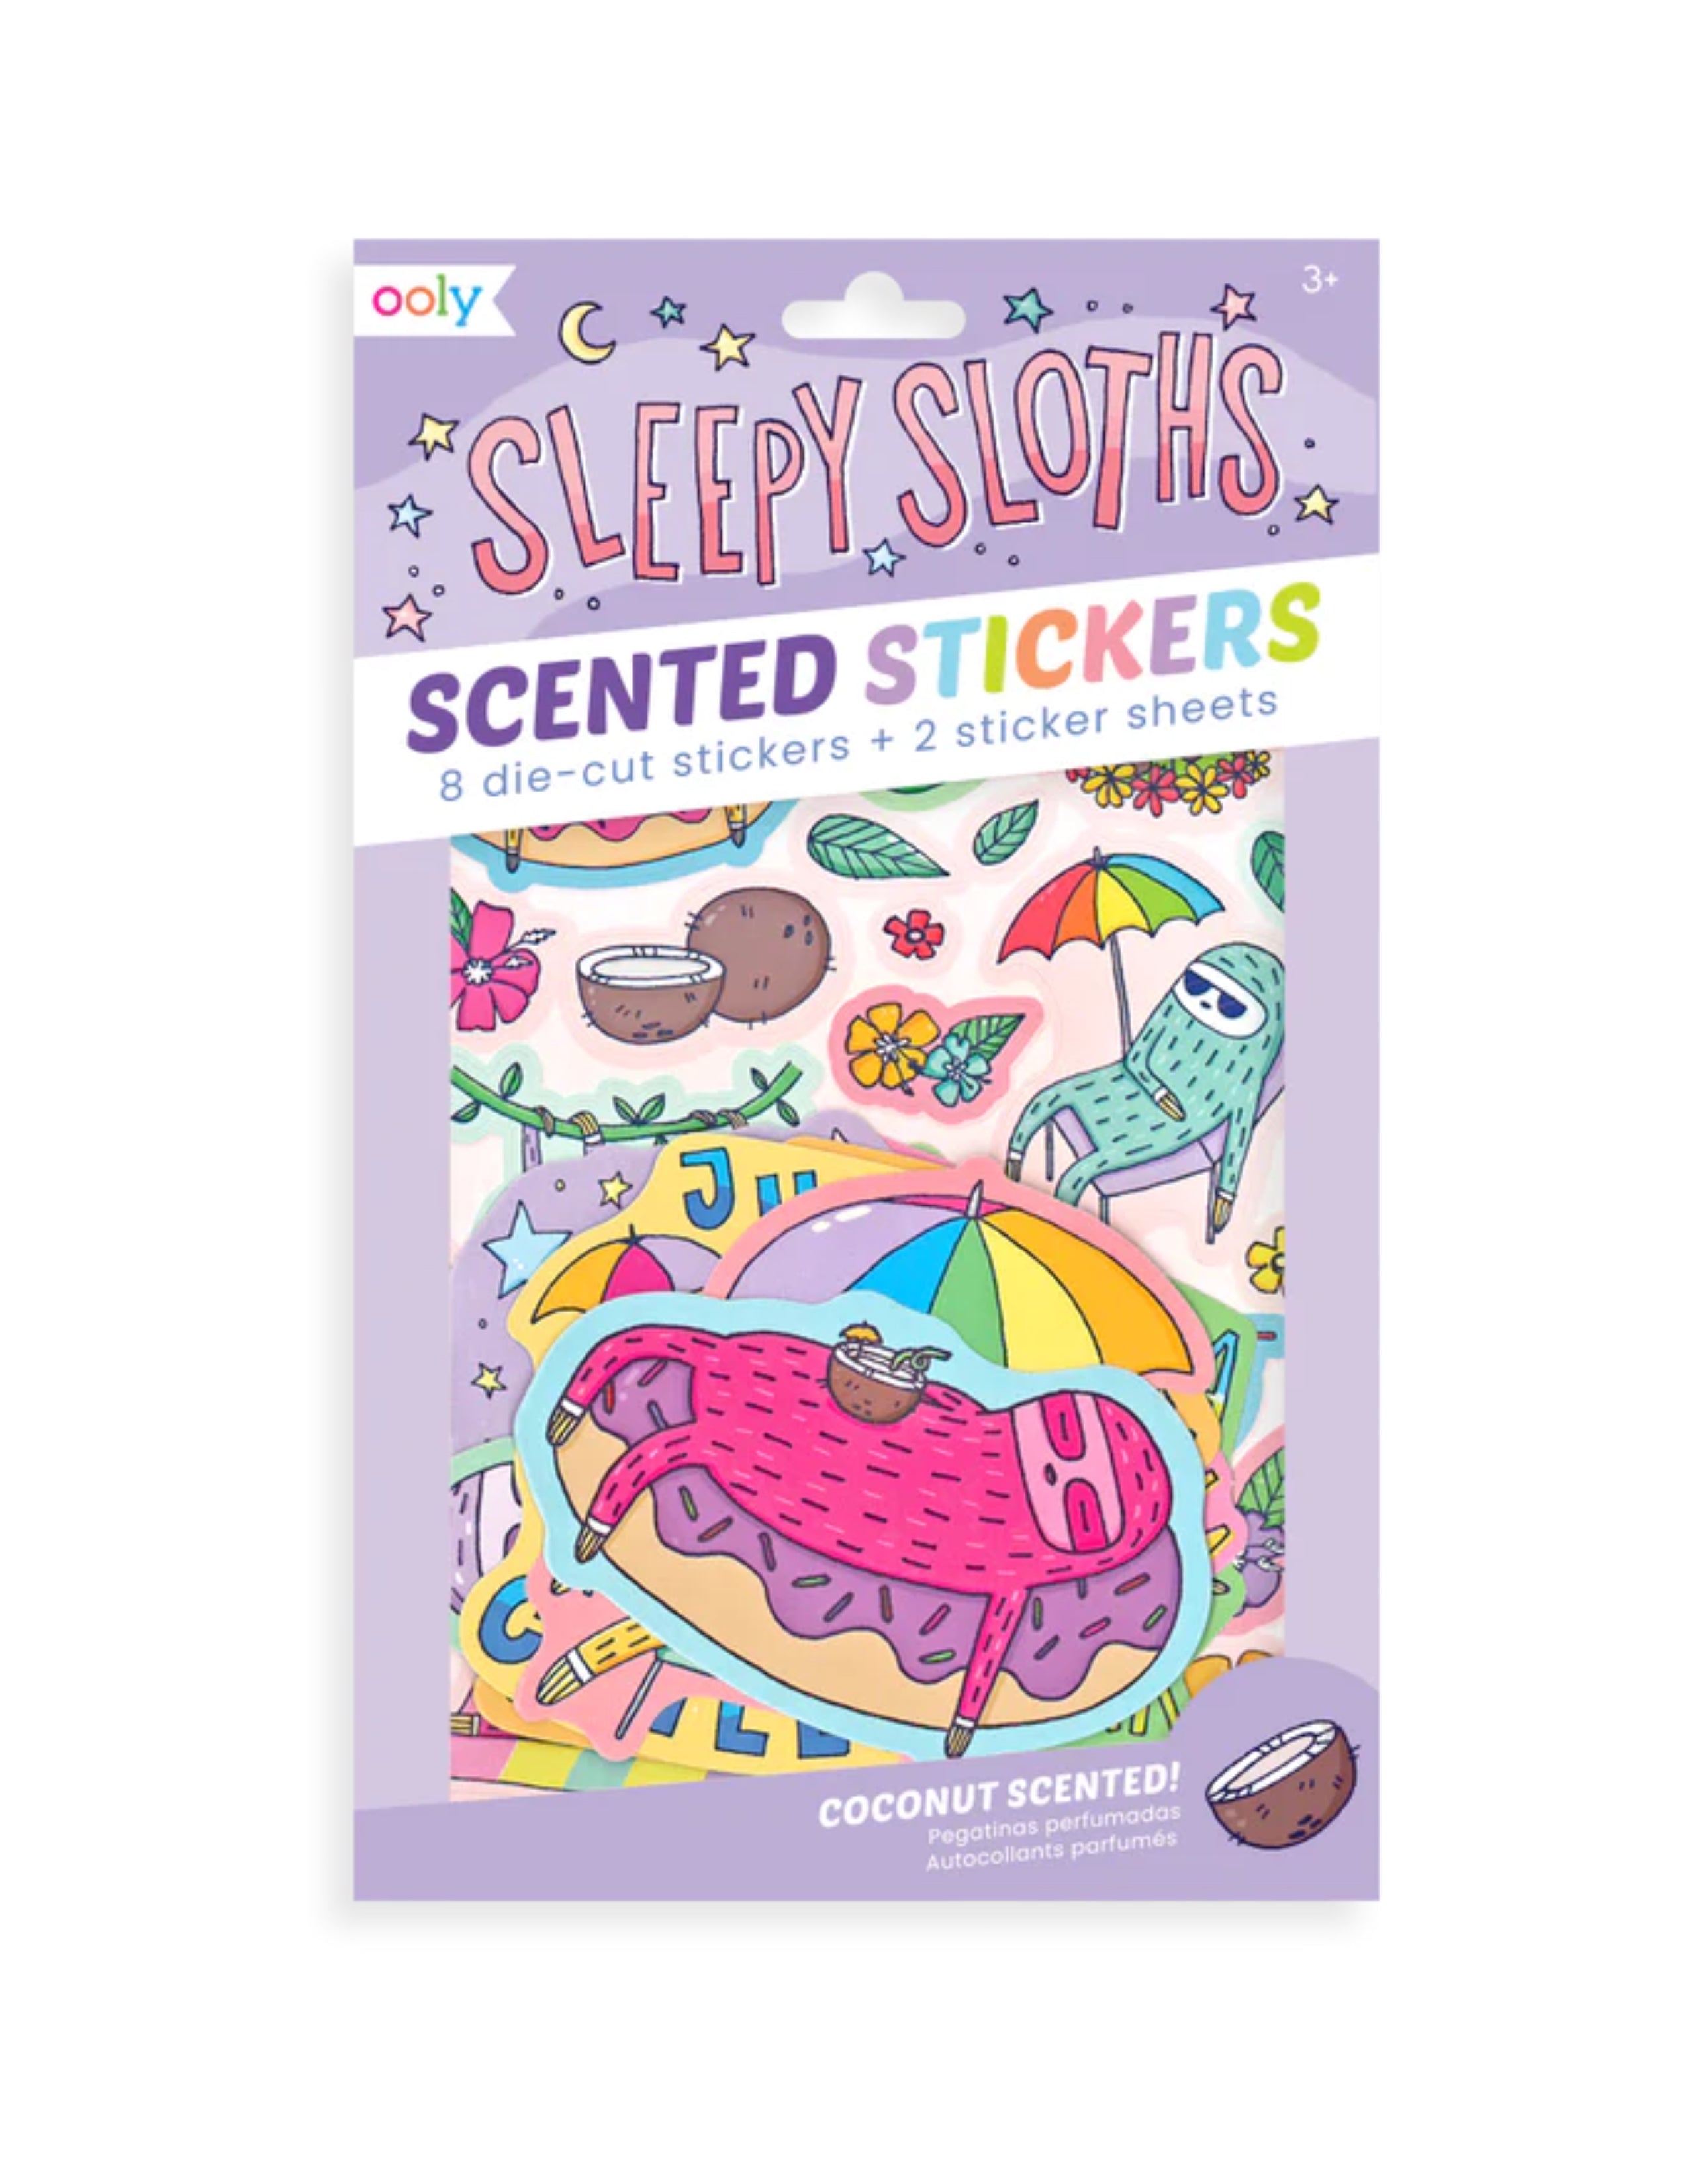 Scented Scratch Stickers - Sleepy Sloths